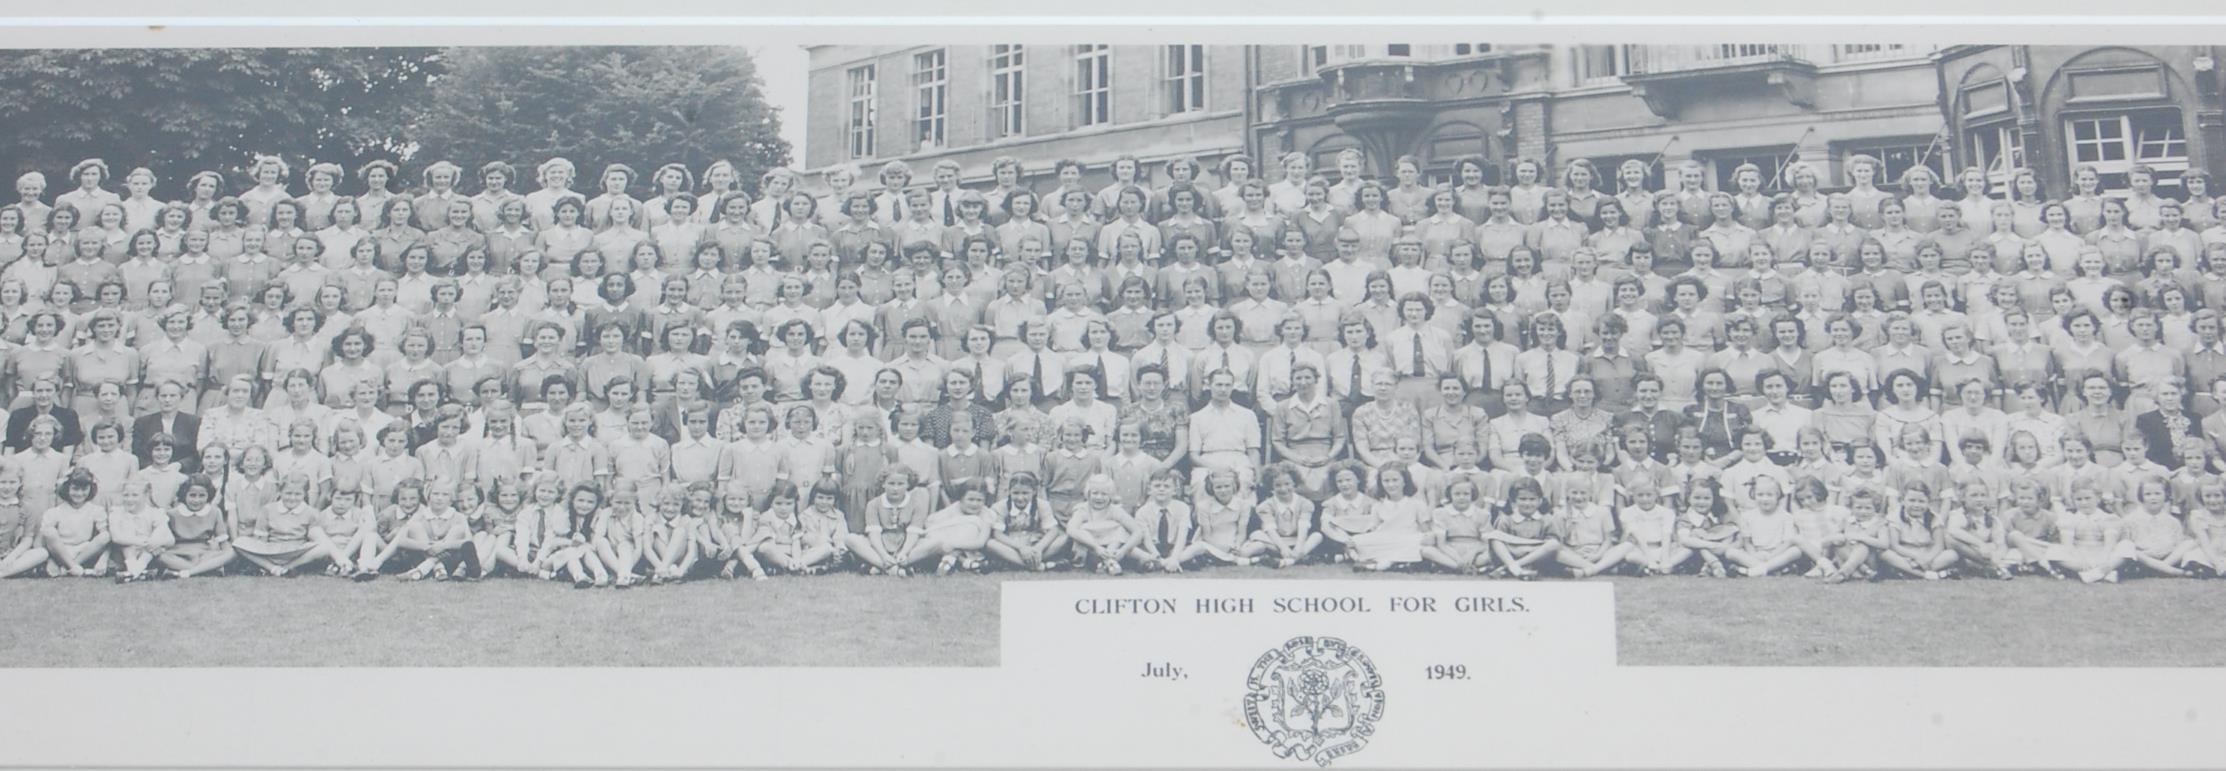 COOLECTION OF FOUR SCHOOL PHOTGRAPHS OF CLIFTON HIGH SCHOOL FOR GIRLS - Image 13 of 18